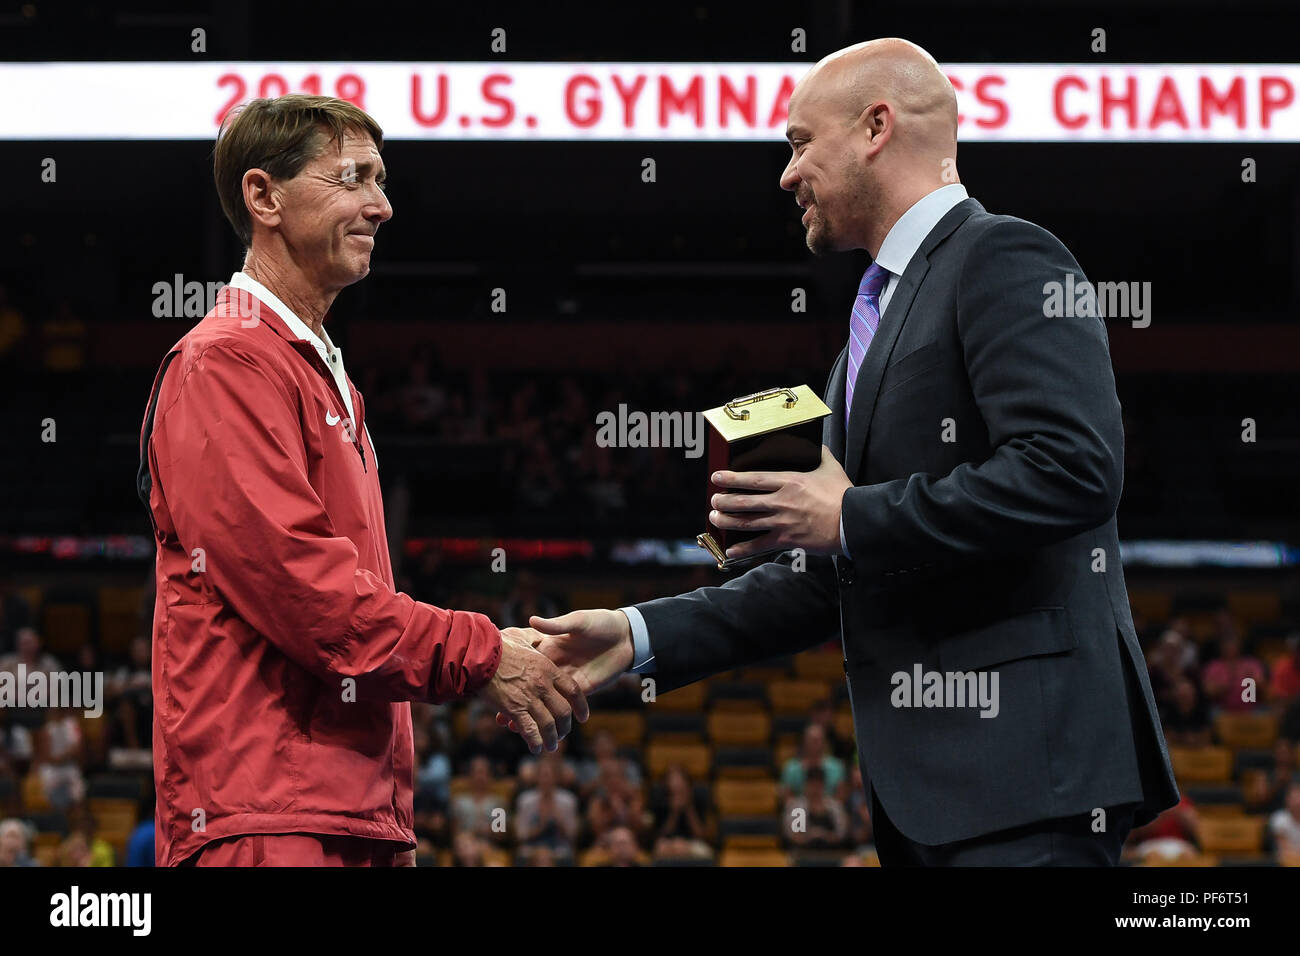 Boston, Massachussetts, USA. 18th Aug, 2018. BRETT MCCLURE (right) presents MARK WILLIAMS (left) with the award for Coach of the Year following the competition held at TD Garden in Boston, Massachusetts. Credit: Amy Sanderson/ZUMA Wire/Alamy Live News Stock Photo